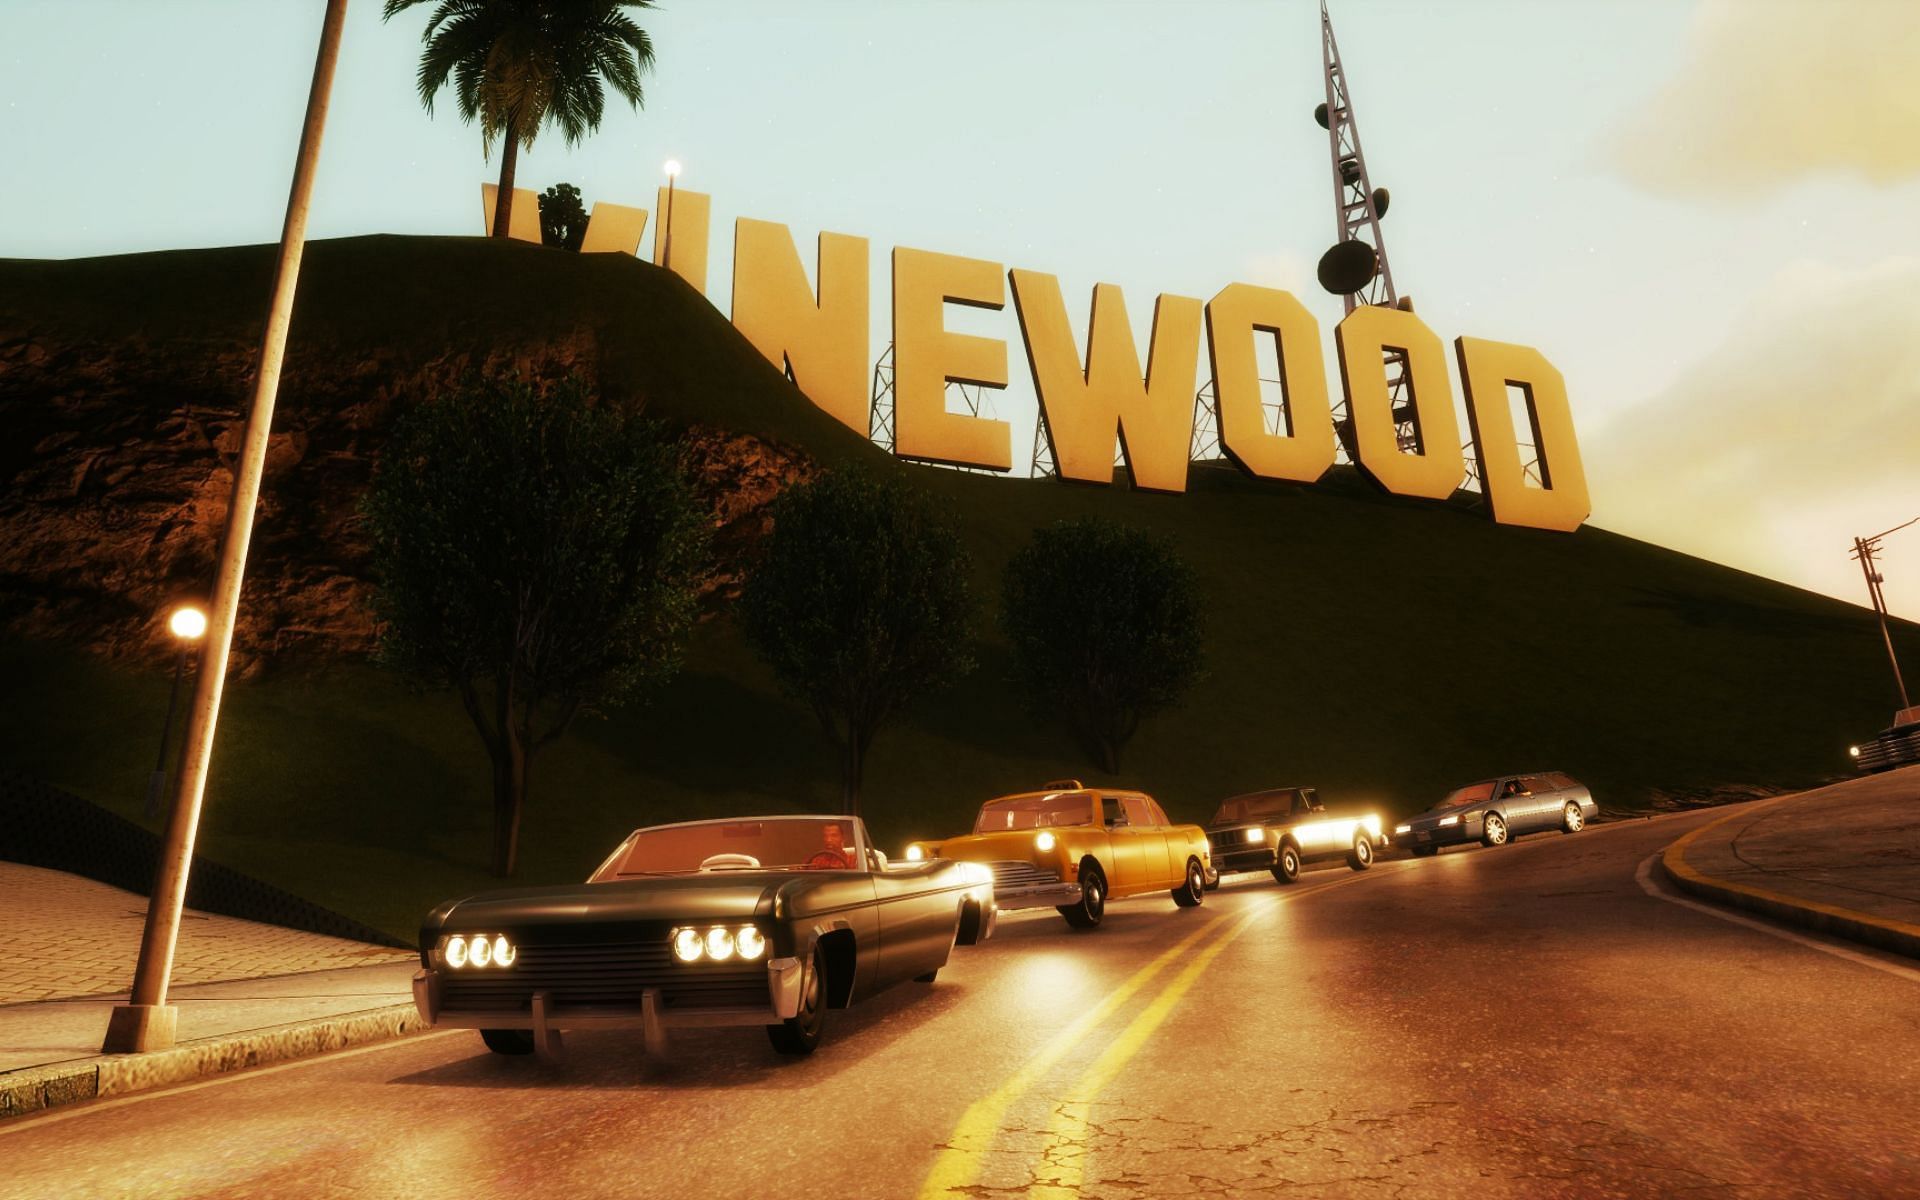 GTA San Andreas - The Definitive Edition Update 1.06 Pushed Out